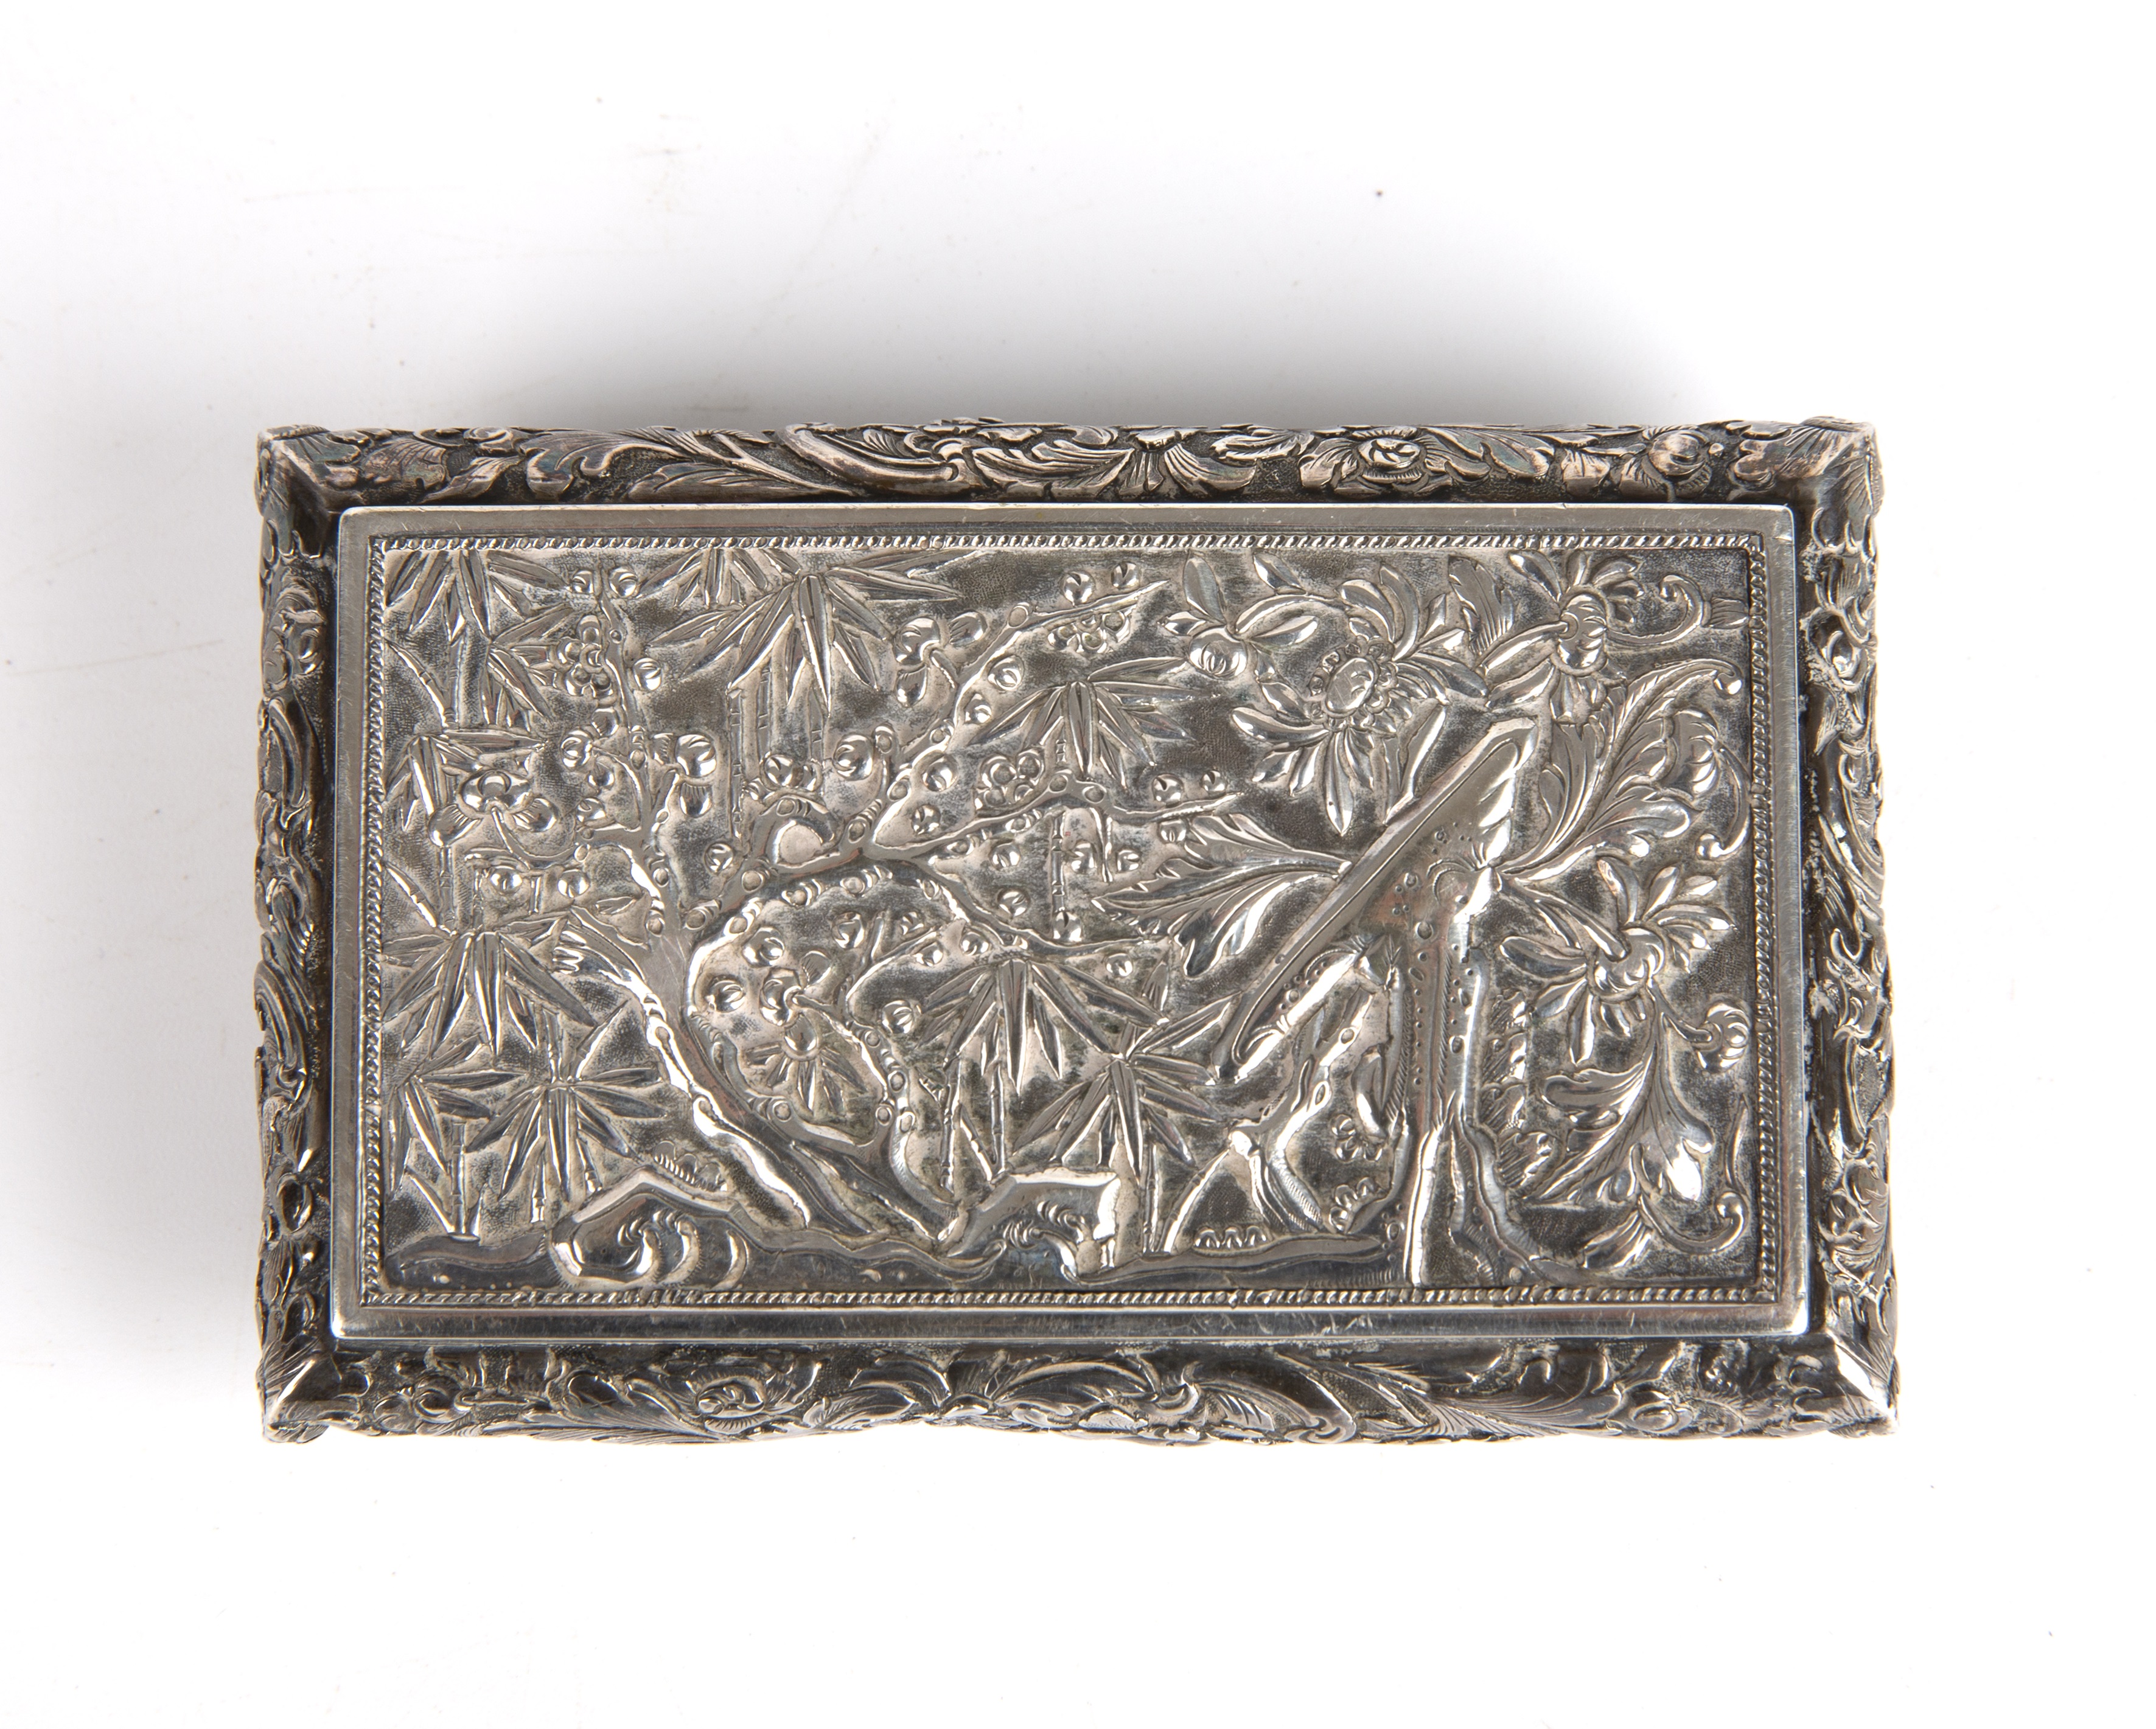 A 19th century silver plated snuff box with chinoiserie embossed decoration, makers mark IC, 10cm - Image 4 of 5